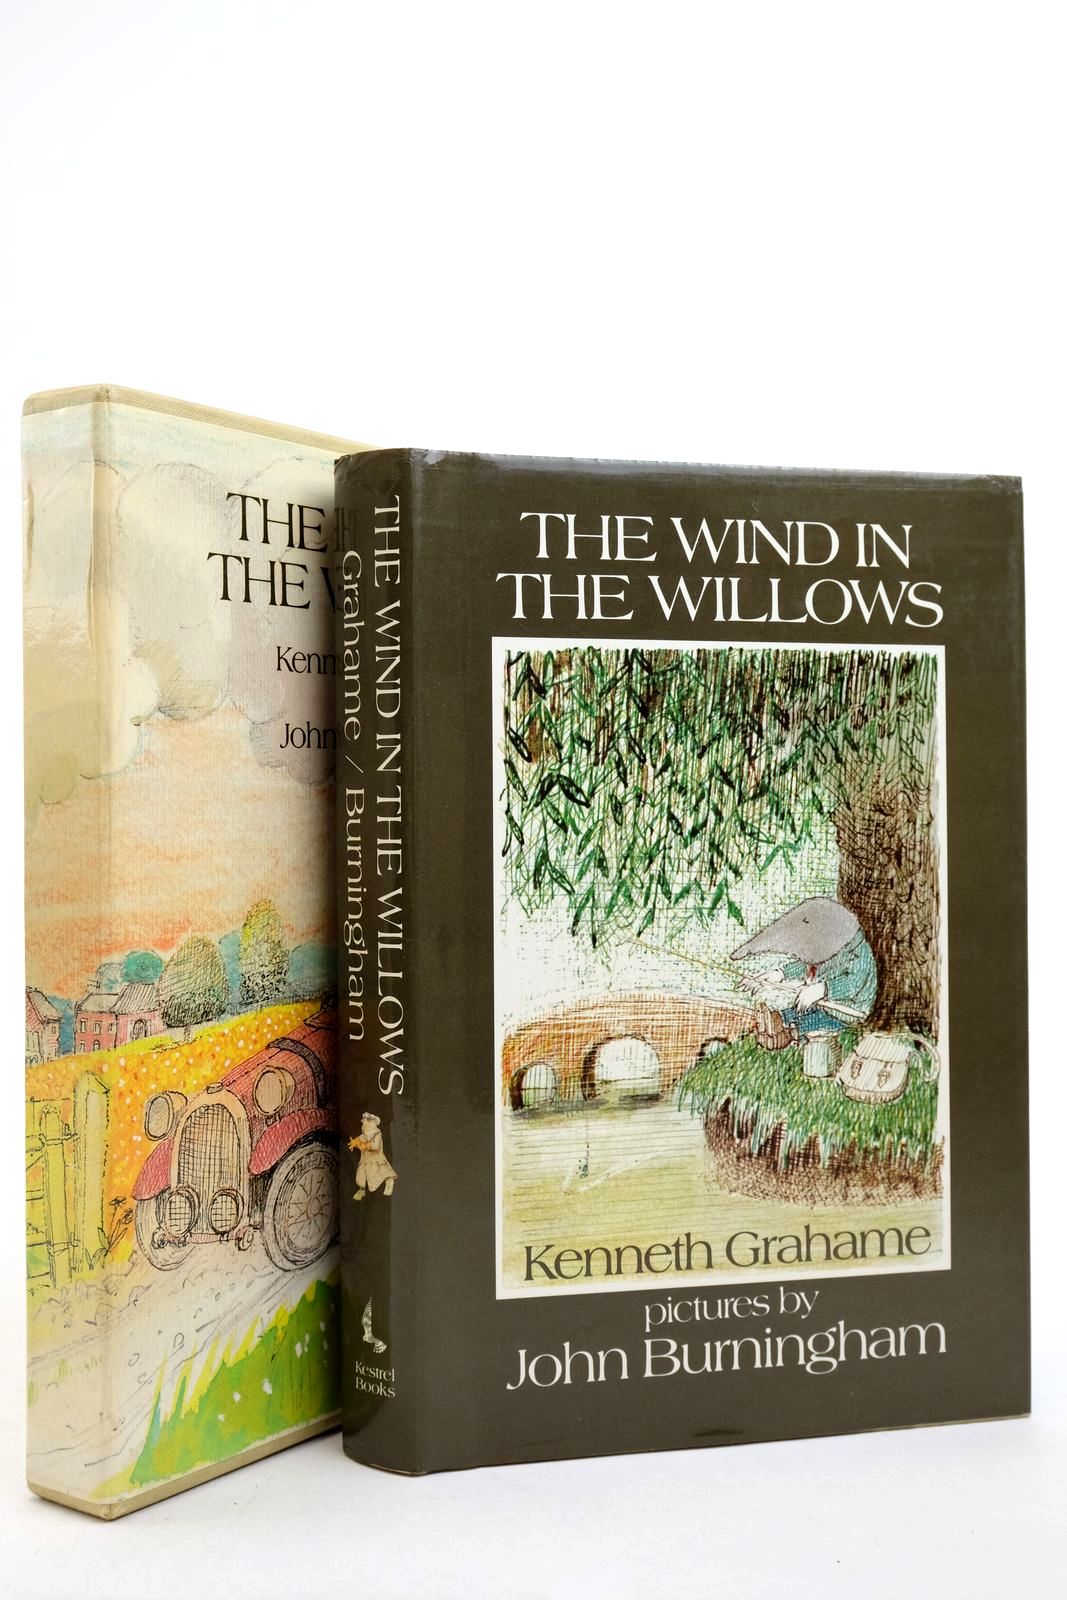 Photo of THE WIND IN THE WILLOWS written by Grahame, Kenneth illustrated by Burningham, John published by Kestrel Books (STOCK CODE: 2139767)  for sale by Stella & Rose's Books